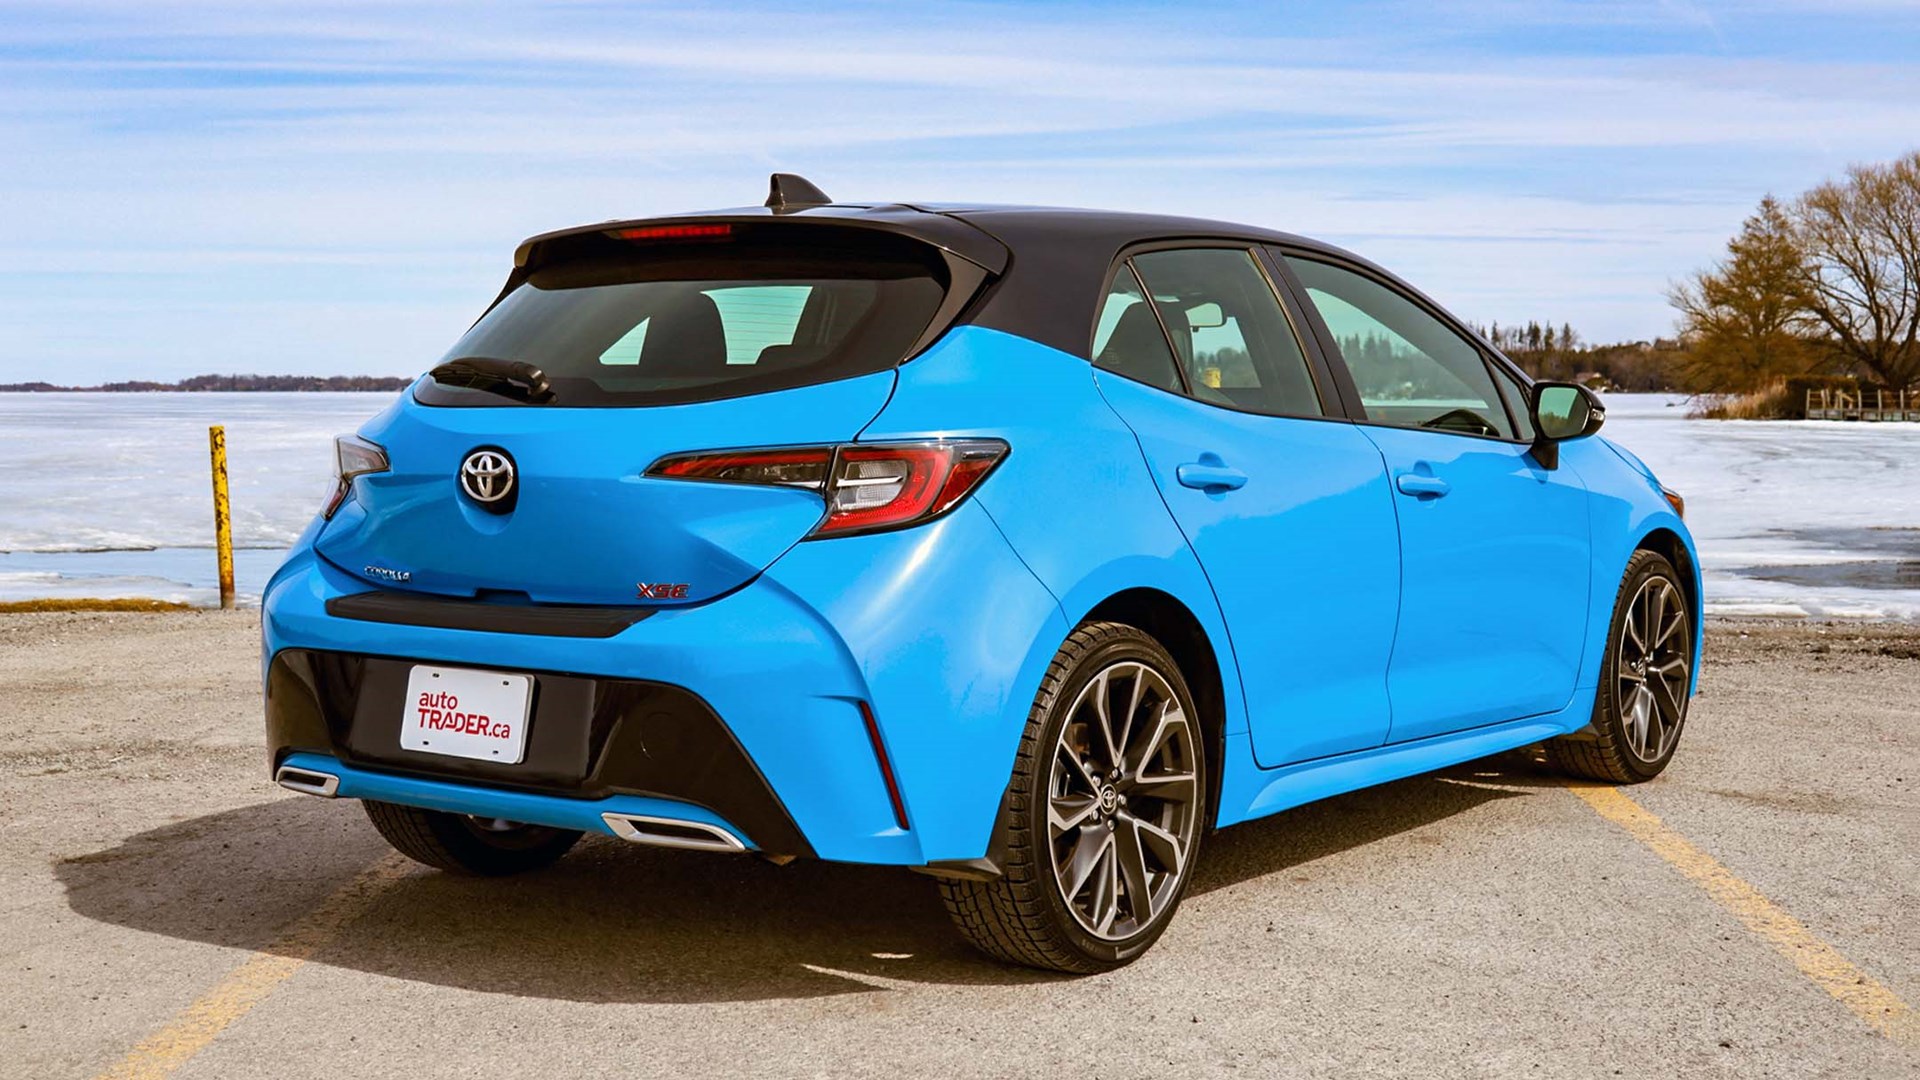 2020 Toyota Corolla Hatchback Review | AutoTrader.ca